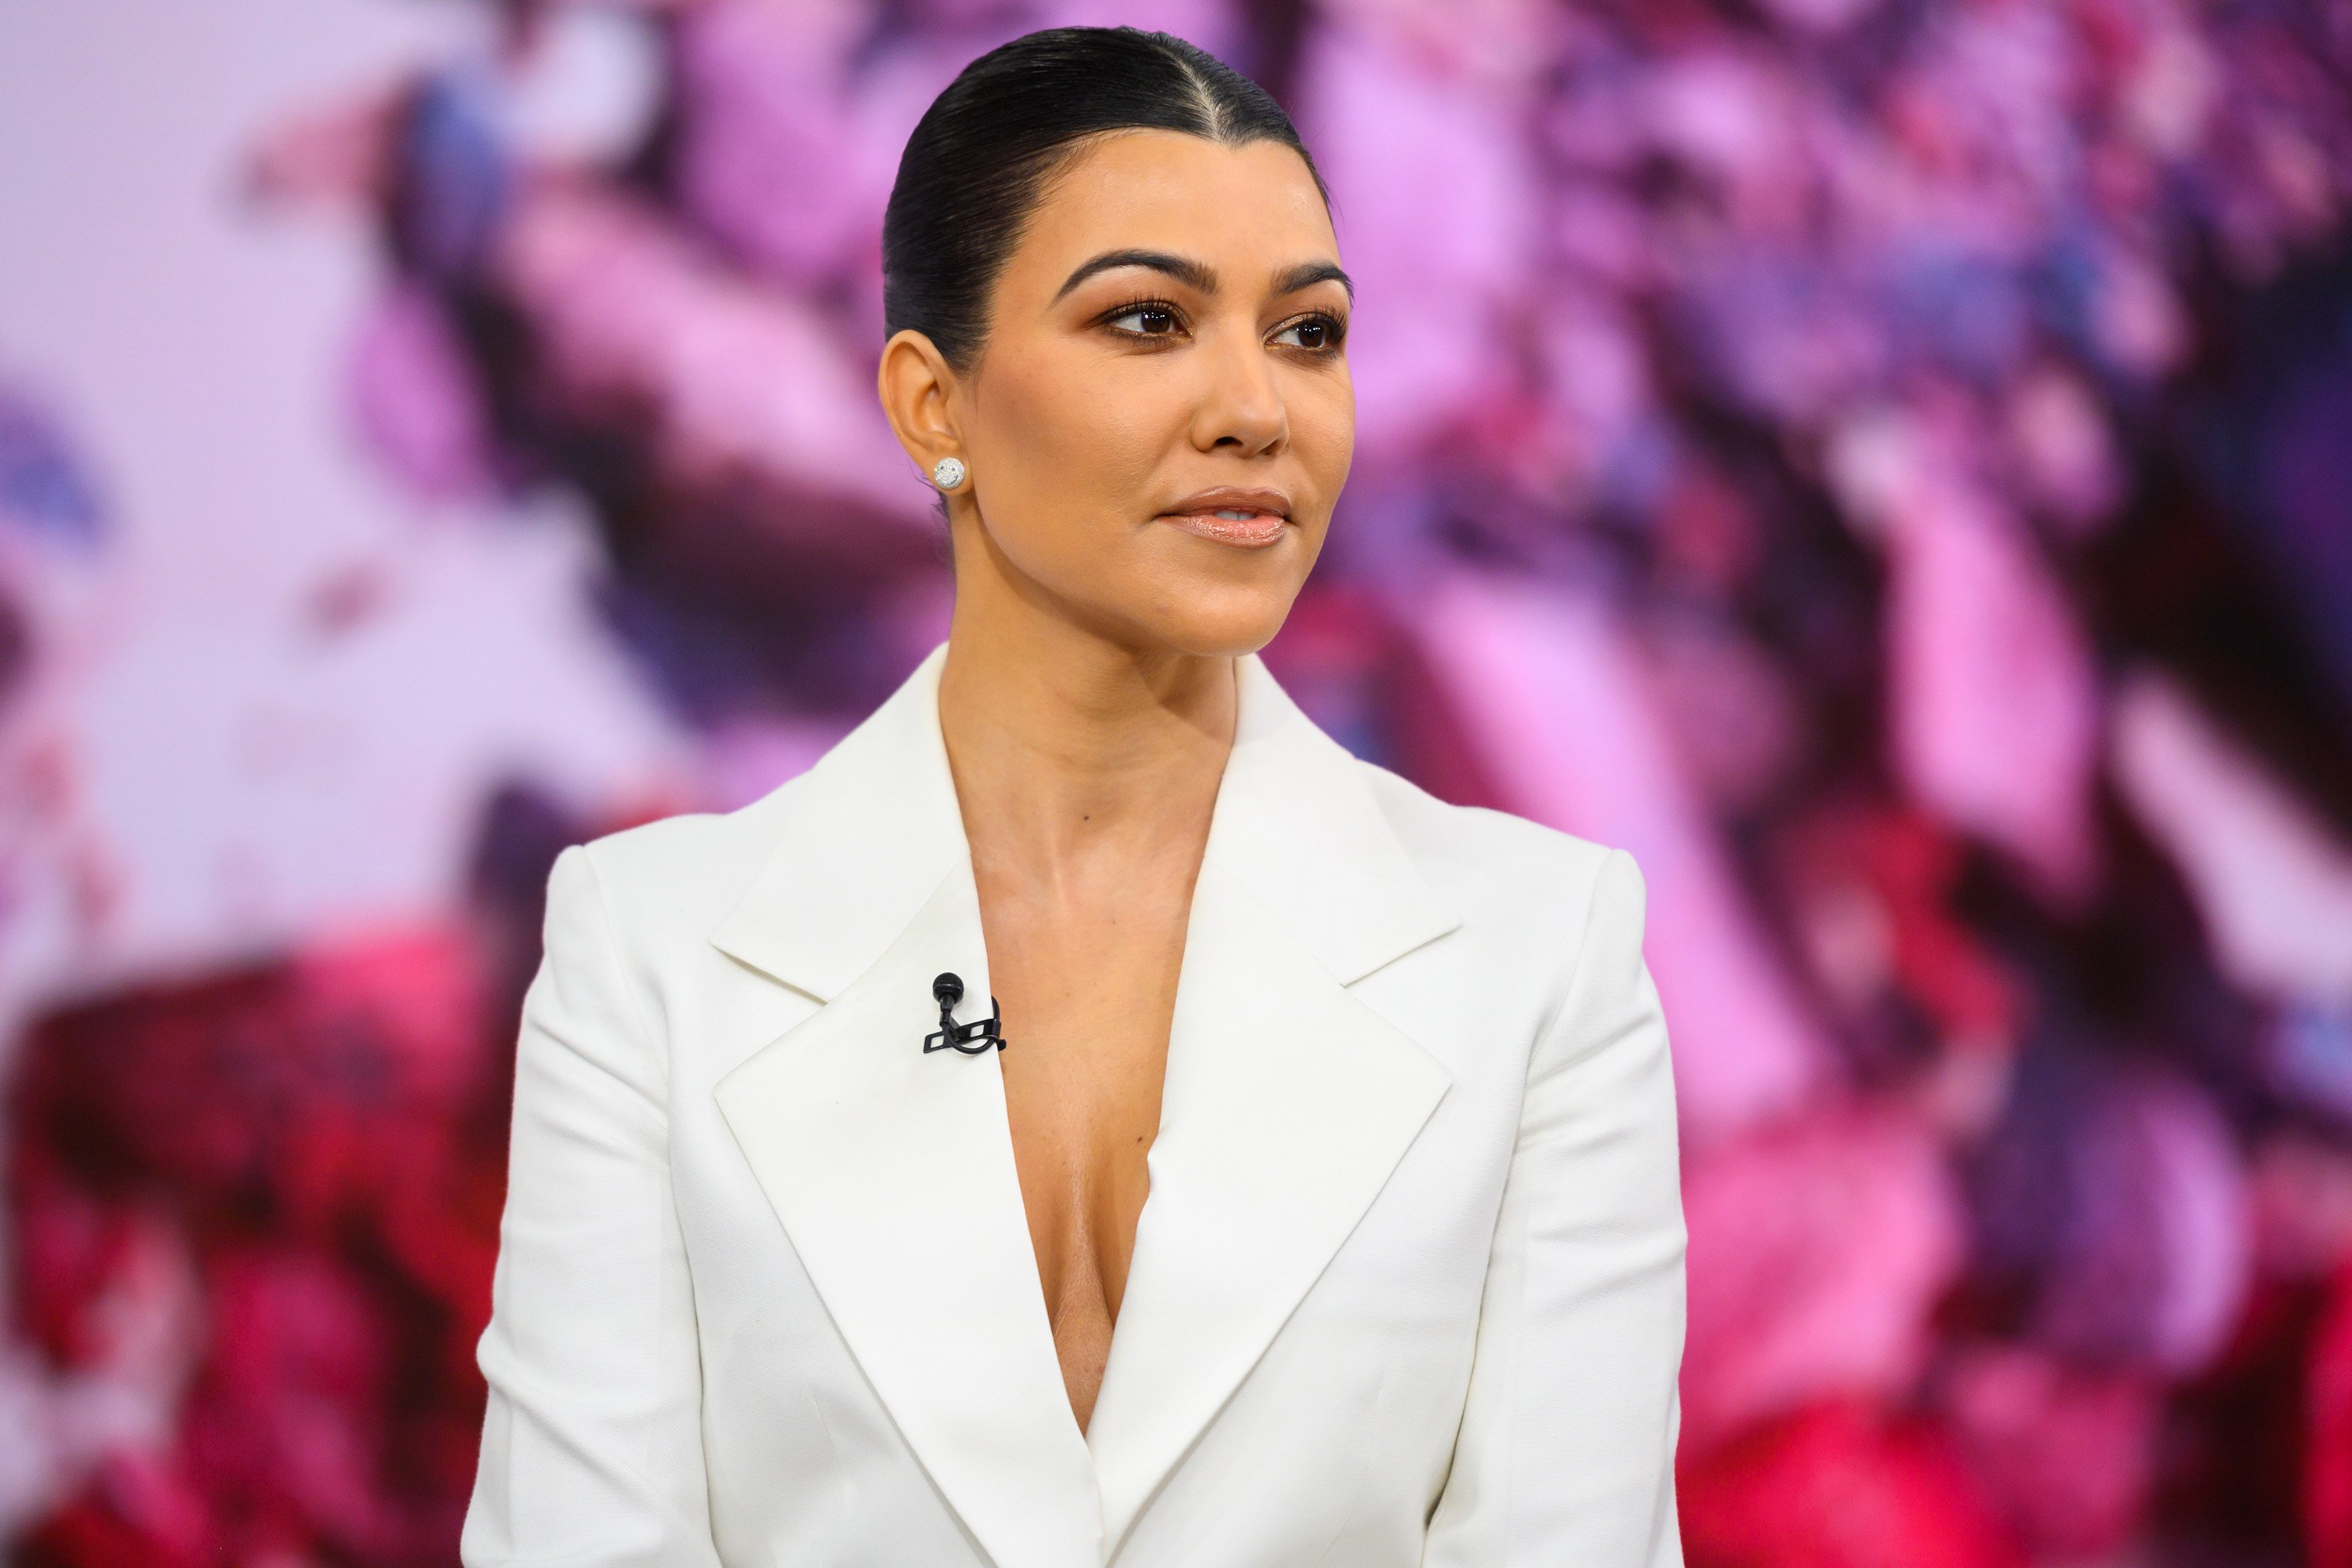 Kourtney Kardashian appears on the “Today” show on Thursday, February 7, 2019. | Source: Getty Images